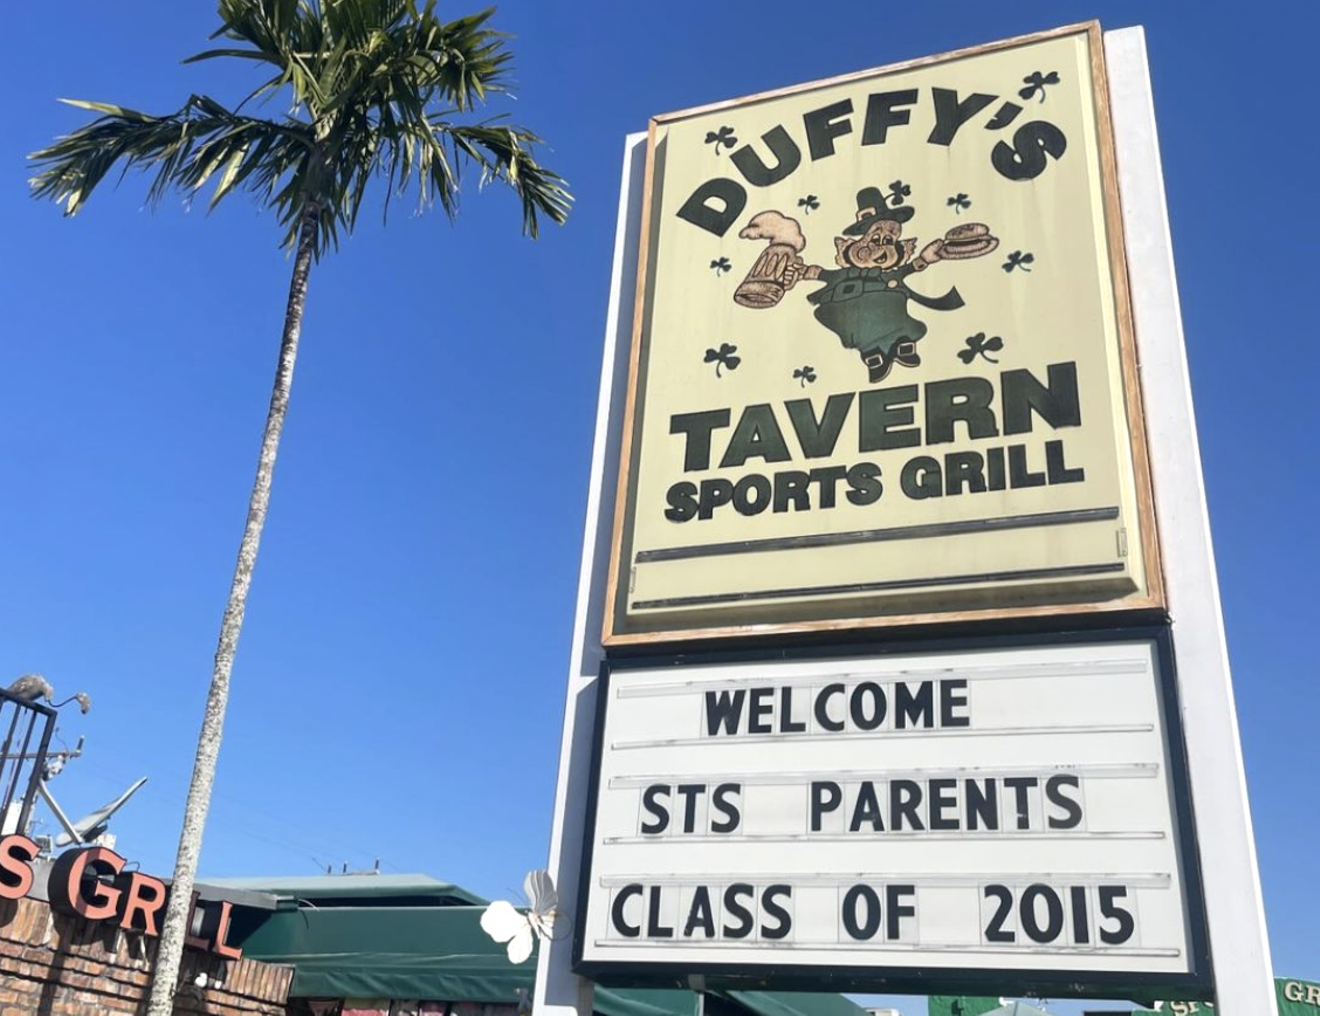 Duffy's Tavern has welcomed generations of Miami residents to its welcoming sports bar and grill, with many regulars hosting reunions there, as well.